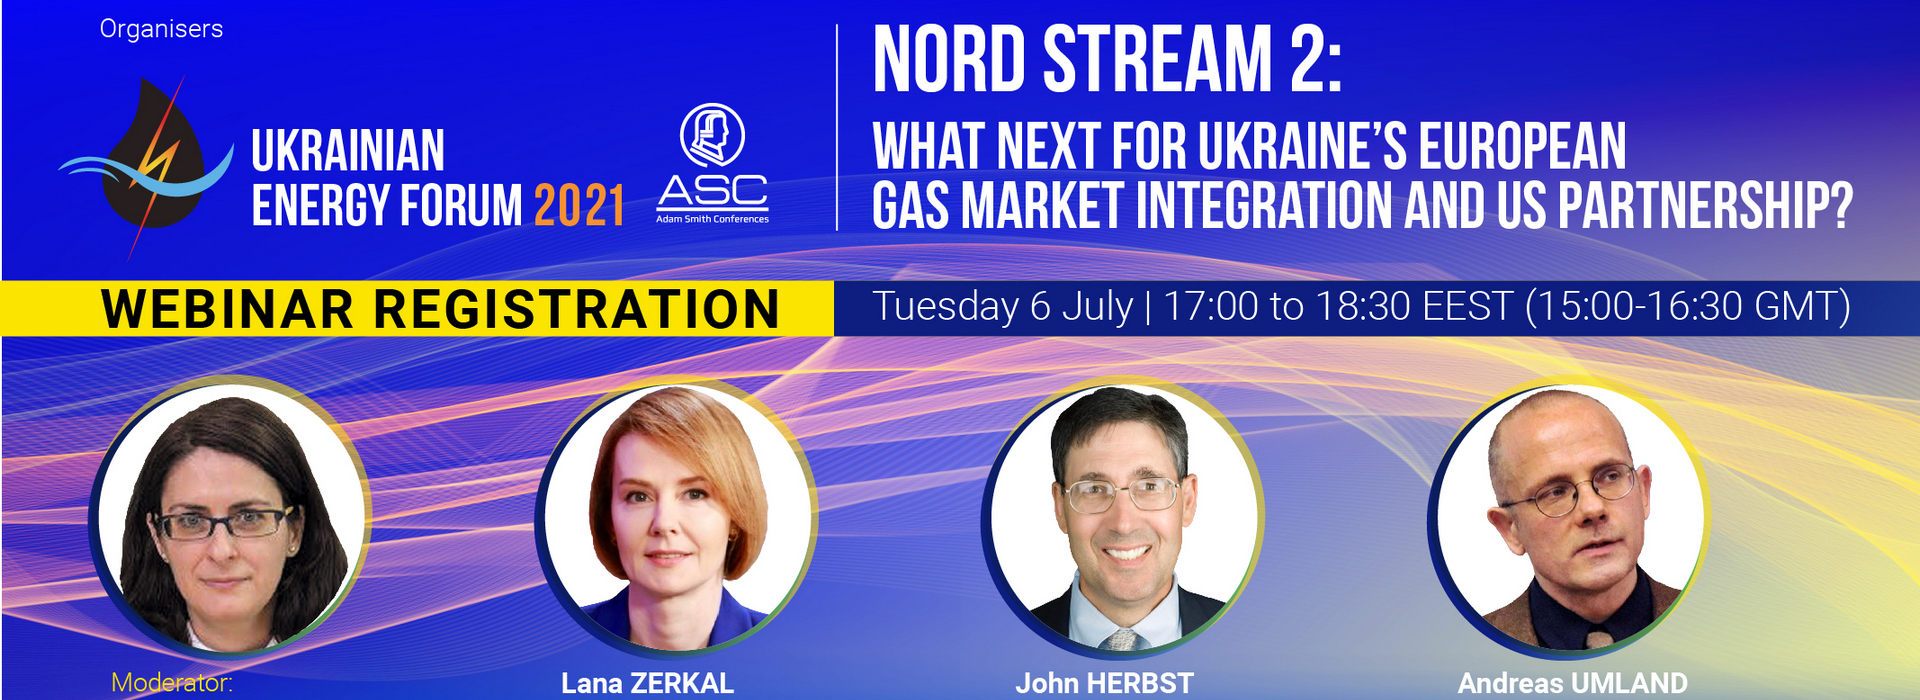 Online Event Focusing on Nord Stream 2: What Next for Ukraine’s European Gas Market Integration and US Partnership?